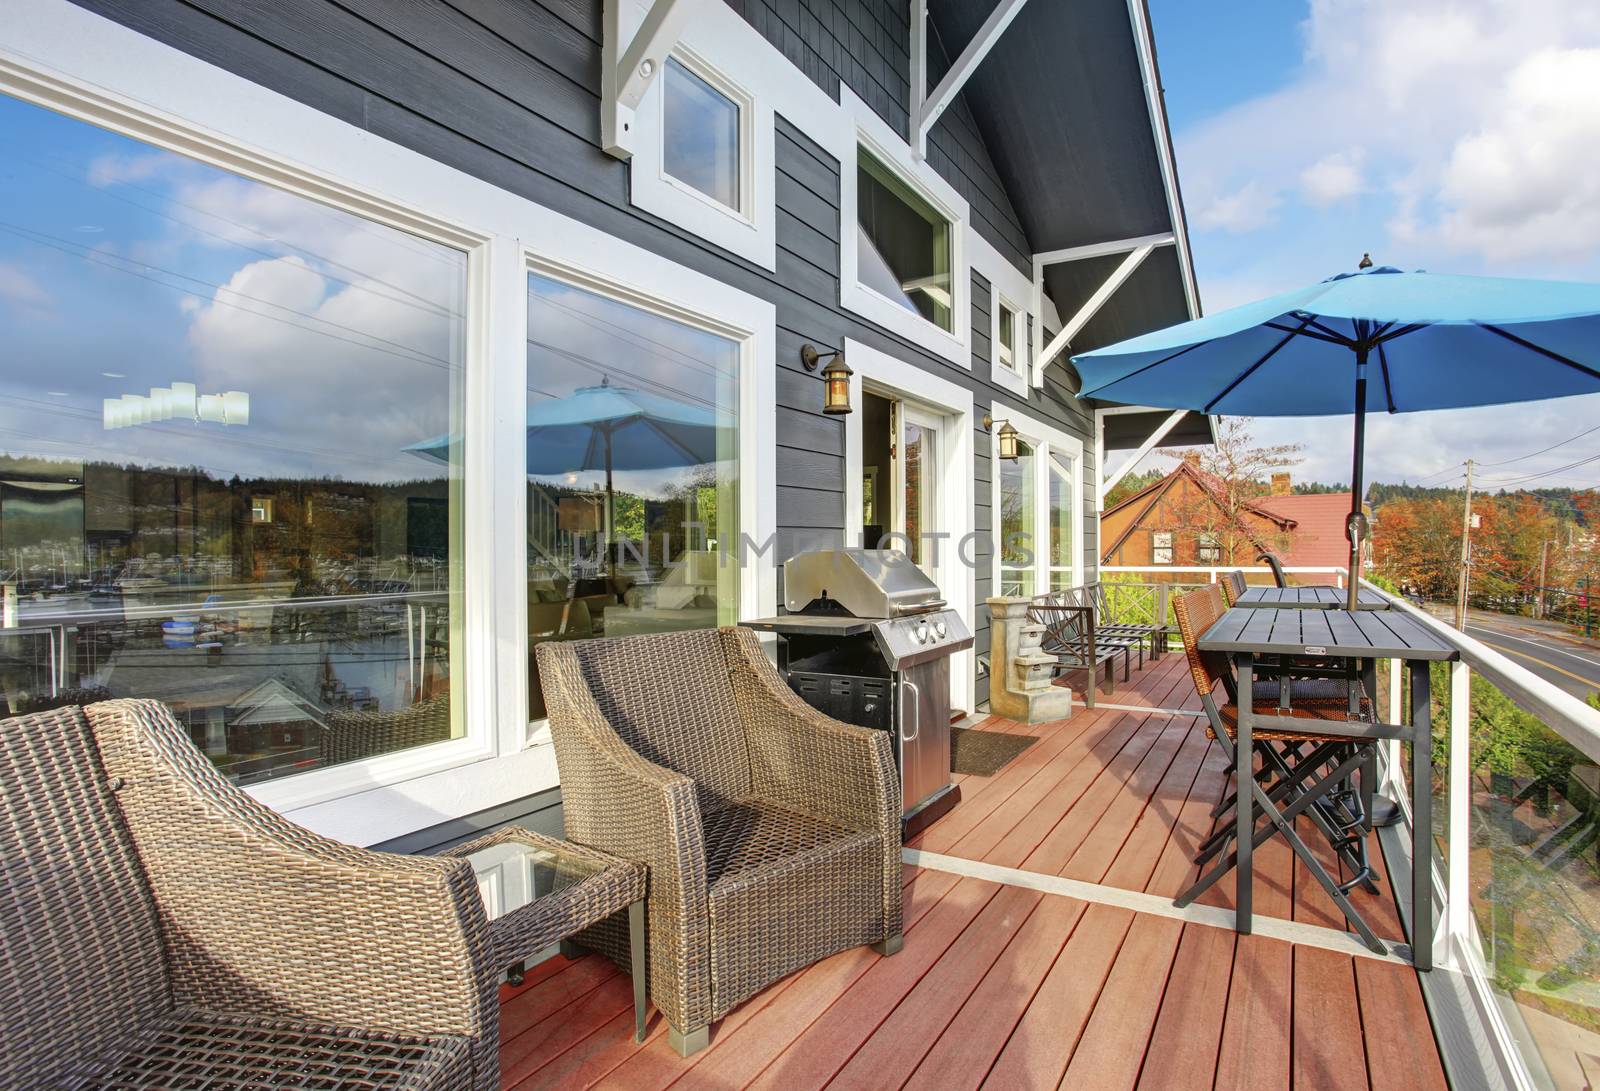 Northwest traditinal wooden deck with large windows, chairs and tables.